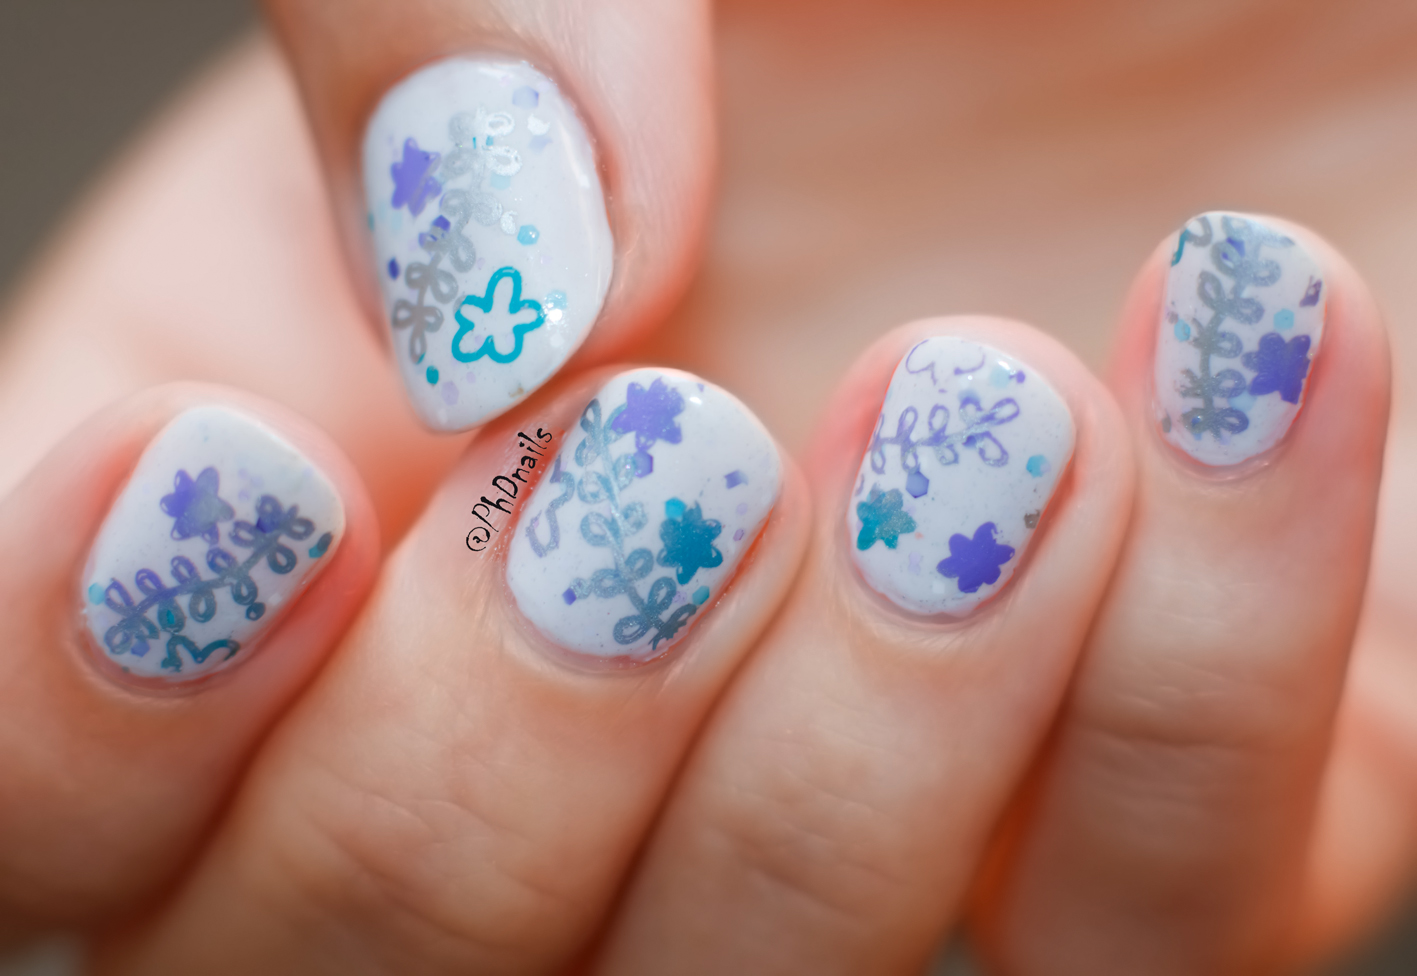 Nail Art Designs for Good Morning - wide 10